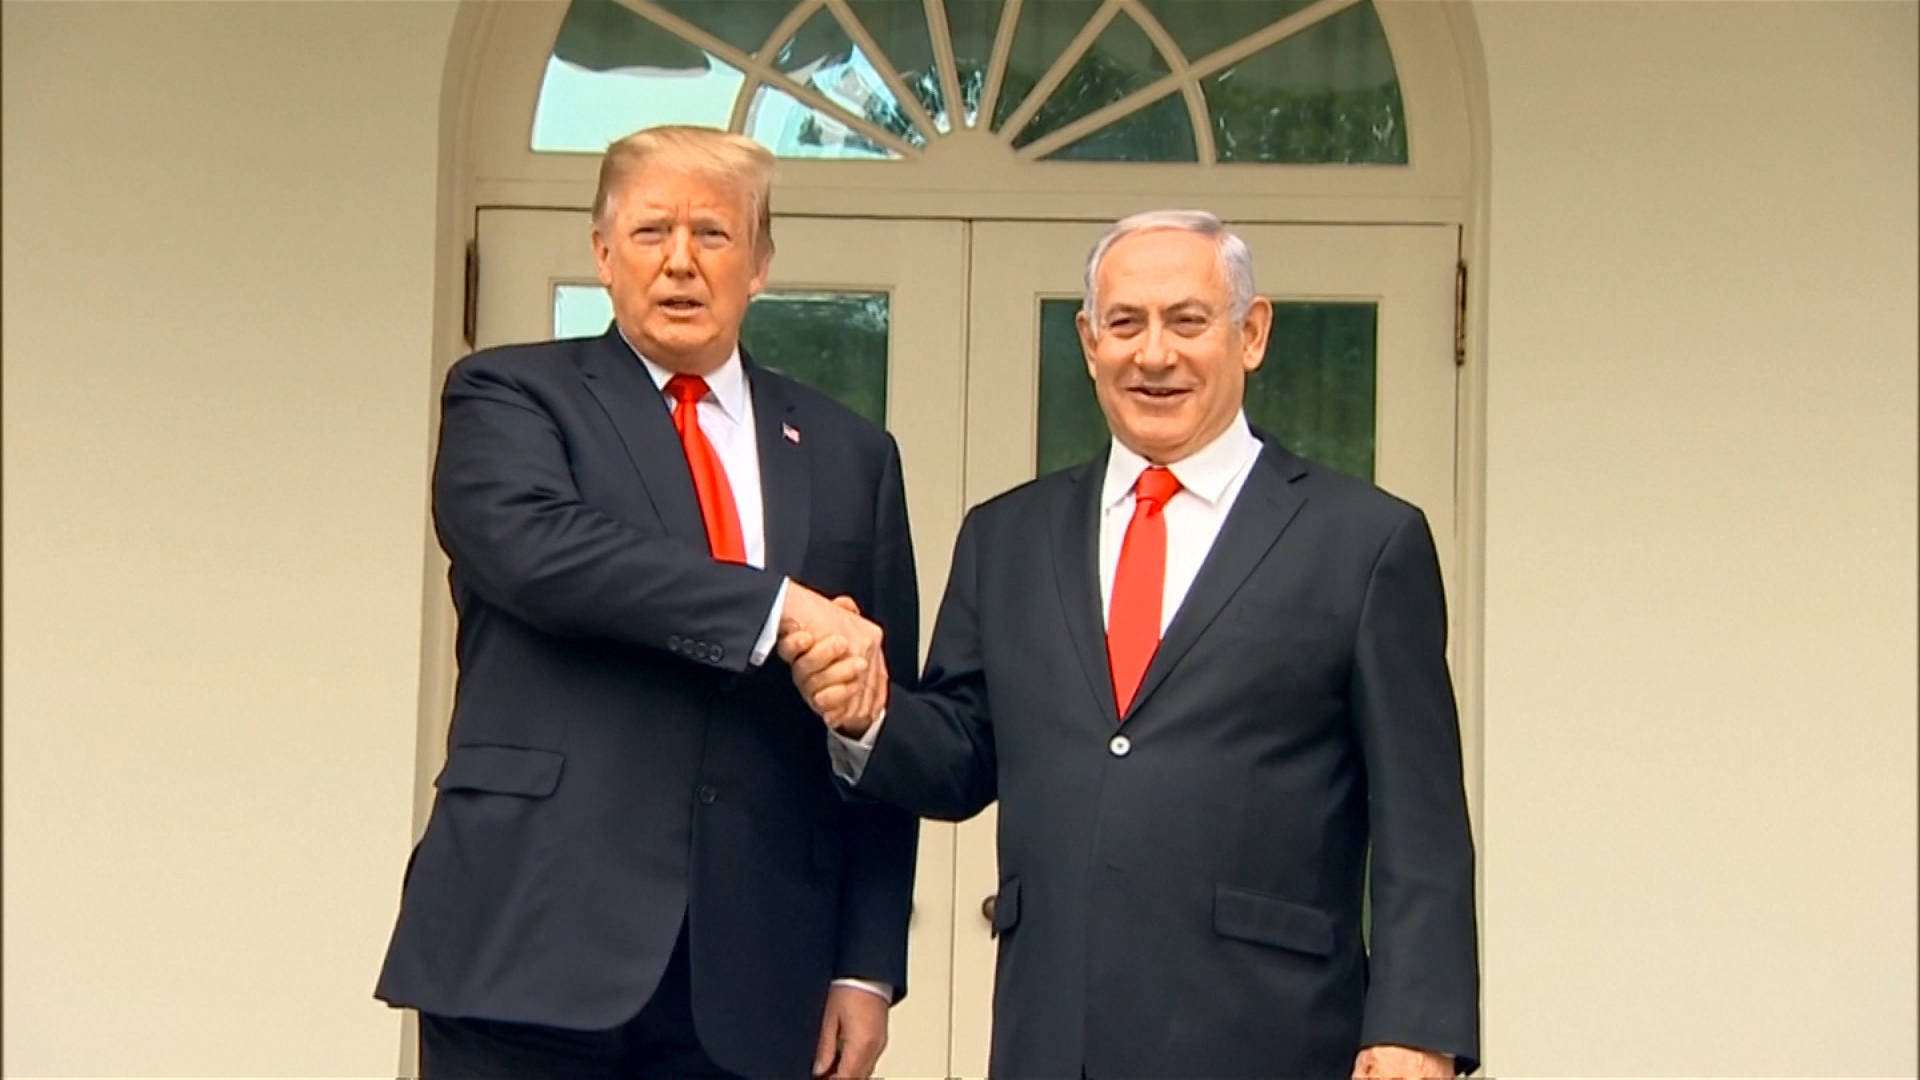 image for Chomsky: Trump Radically Interfered with Israel’s Election to Help Re-elect Netanyahu